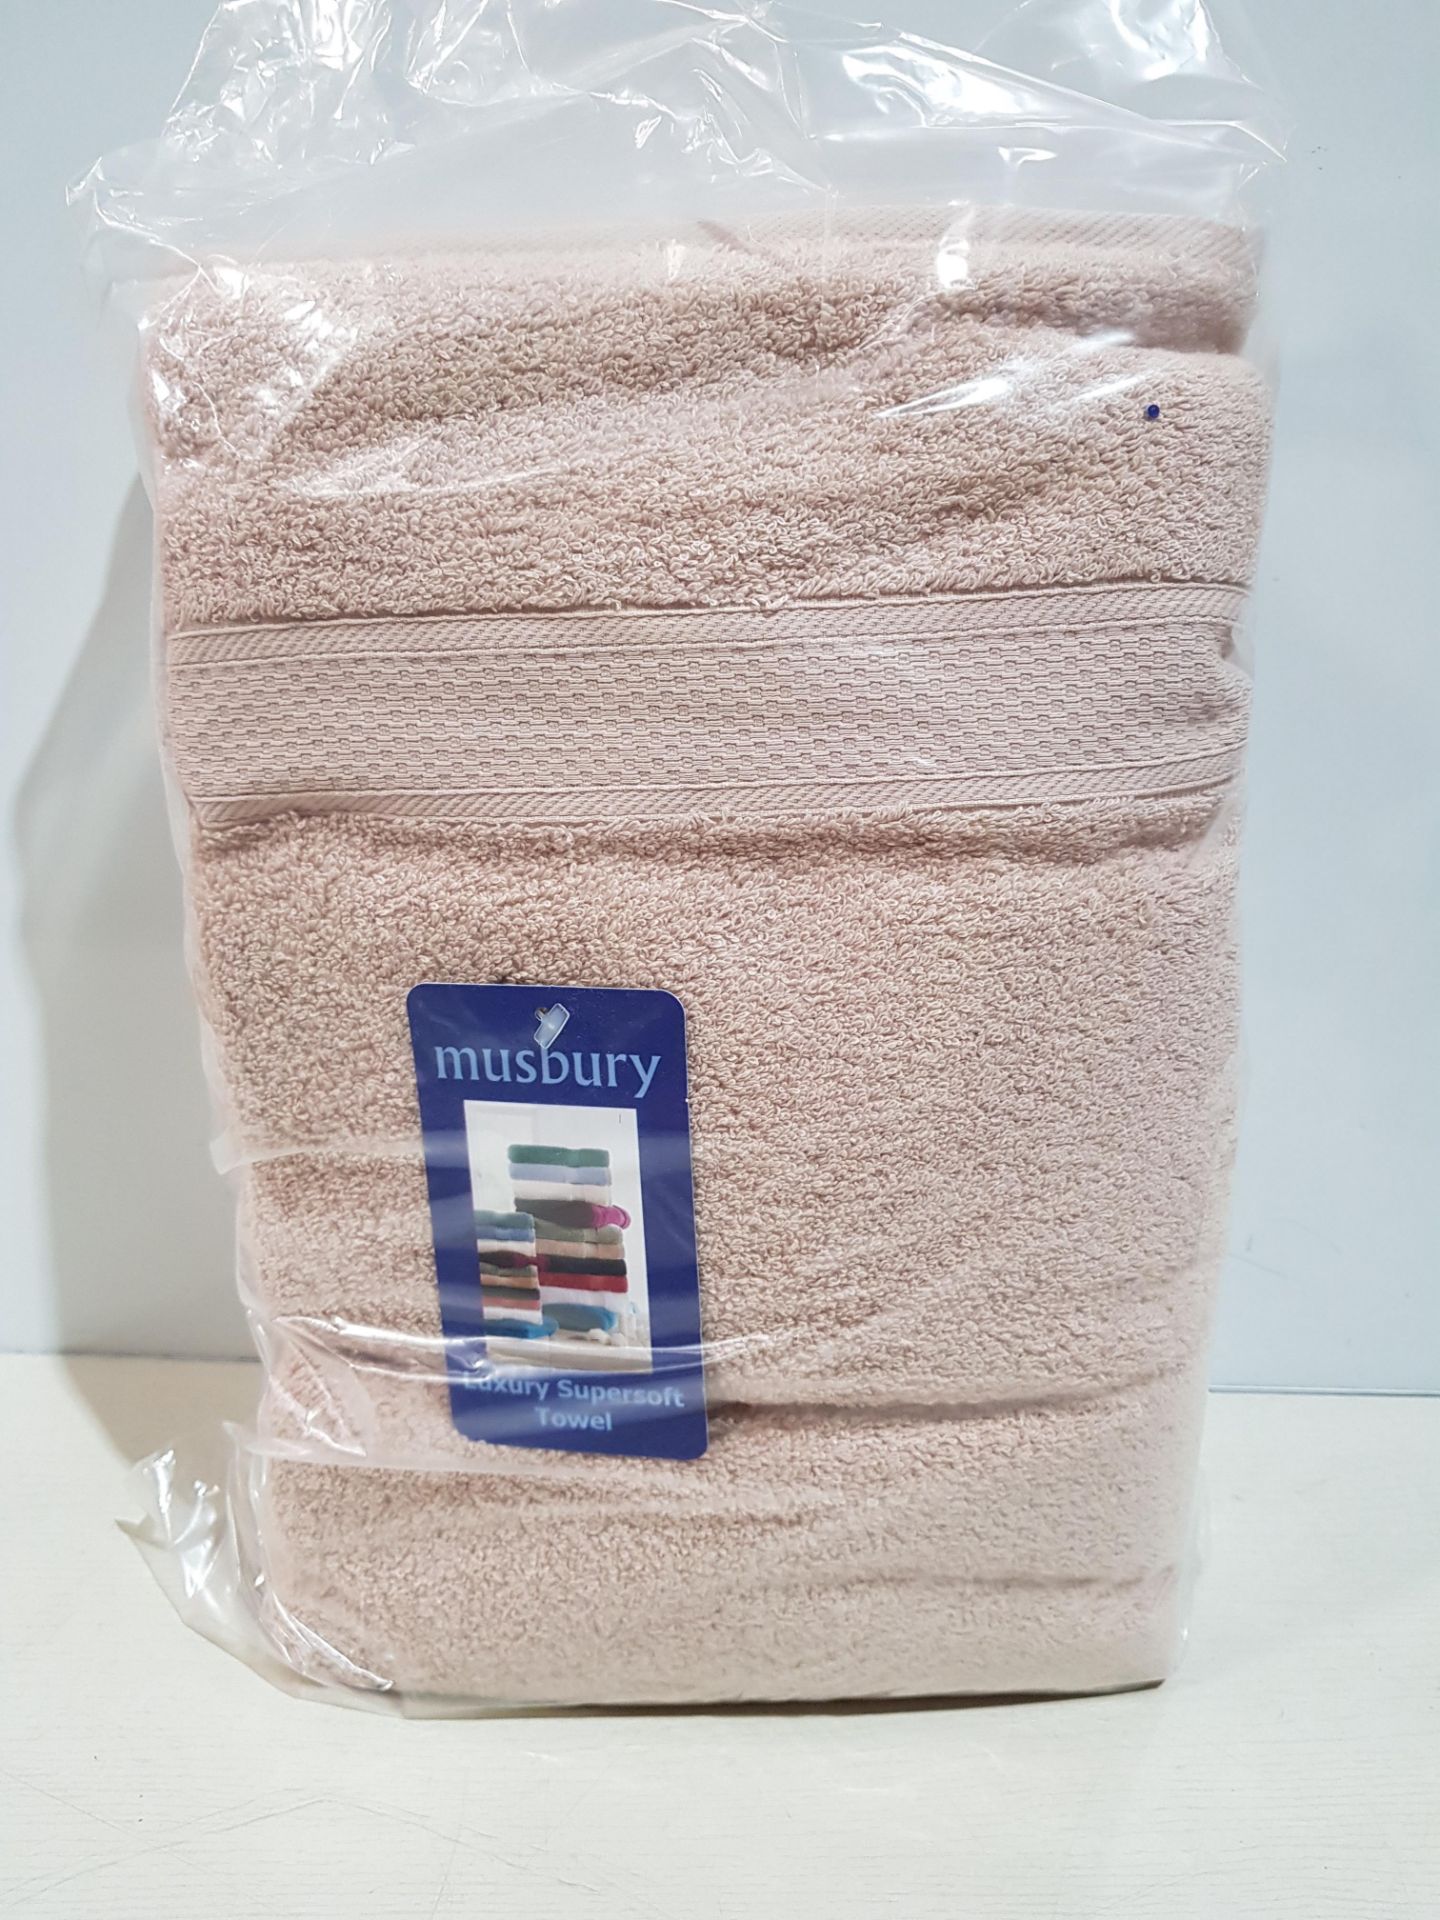 30 X BRAND NEW MUSBURY LUXURY SUPERSOFT TOWELS - ALL IN LATTE COLOUR - (70 X 127 CM ) - IN 2 BOXES